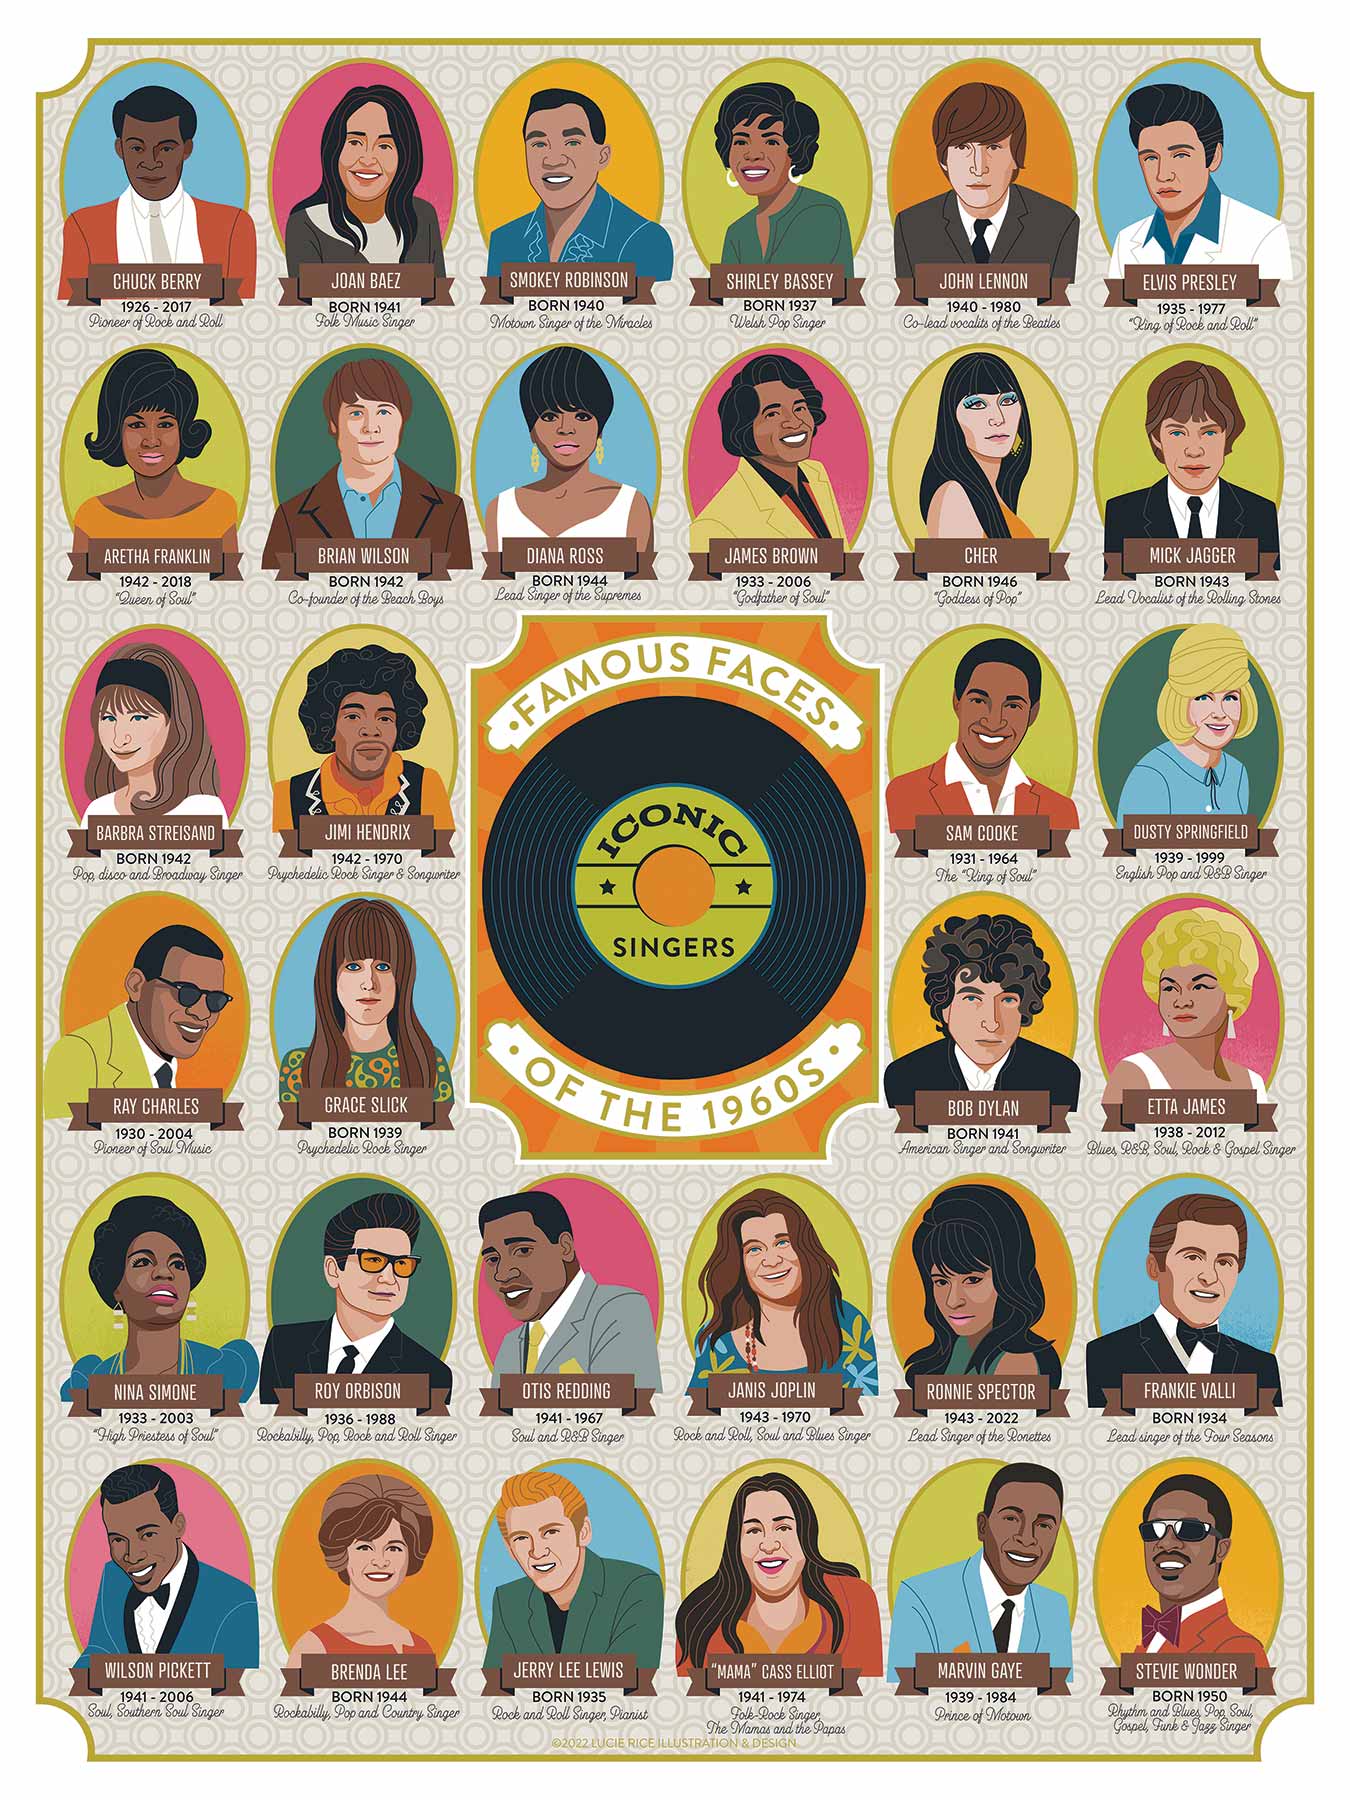 A vibrant puzzle showcasing iconic singers of the 1960s in various colors.